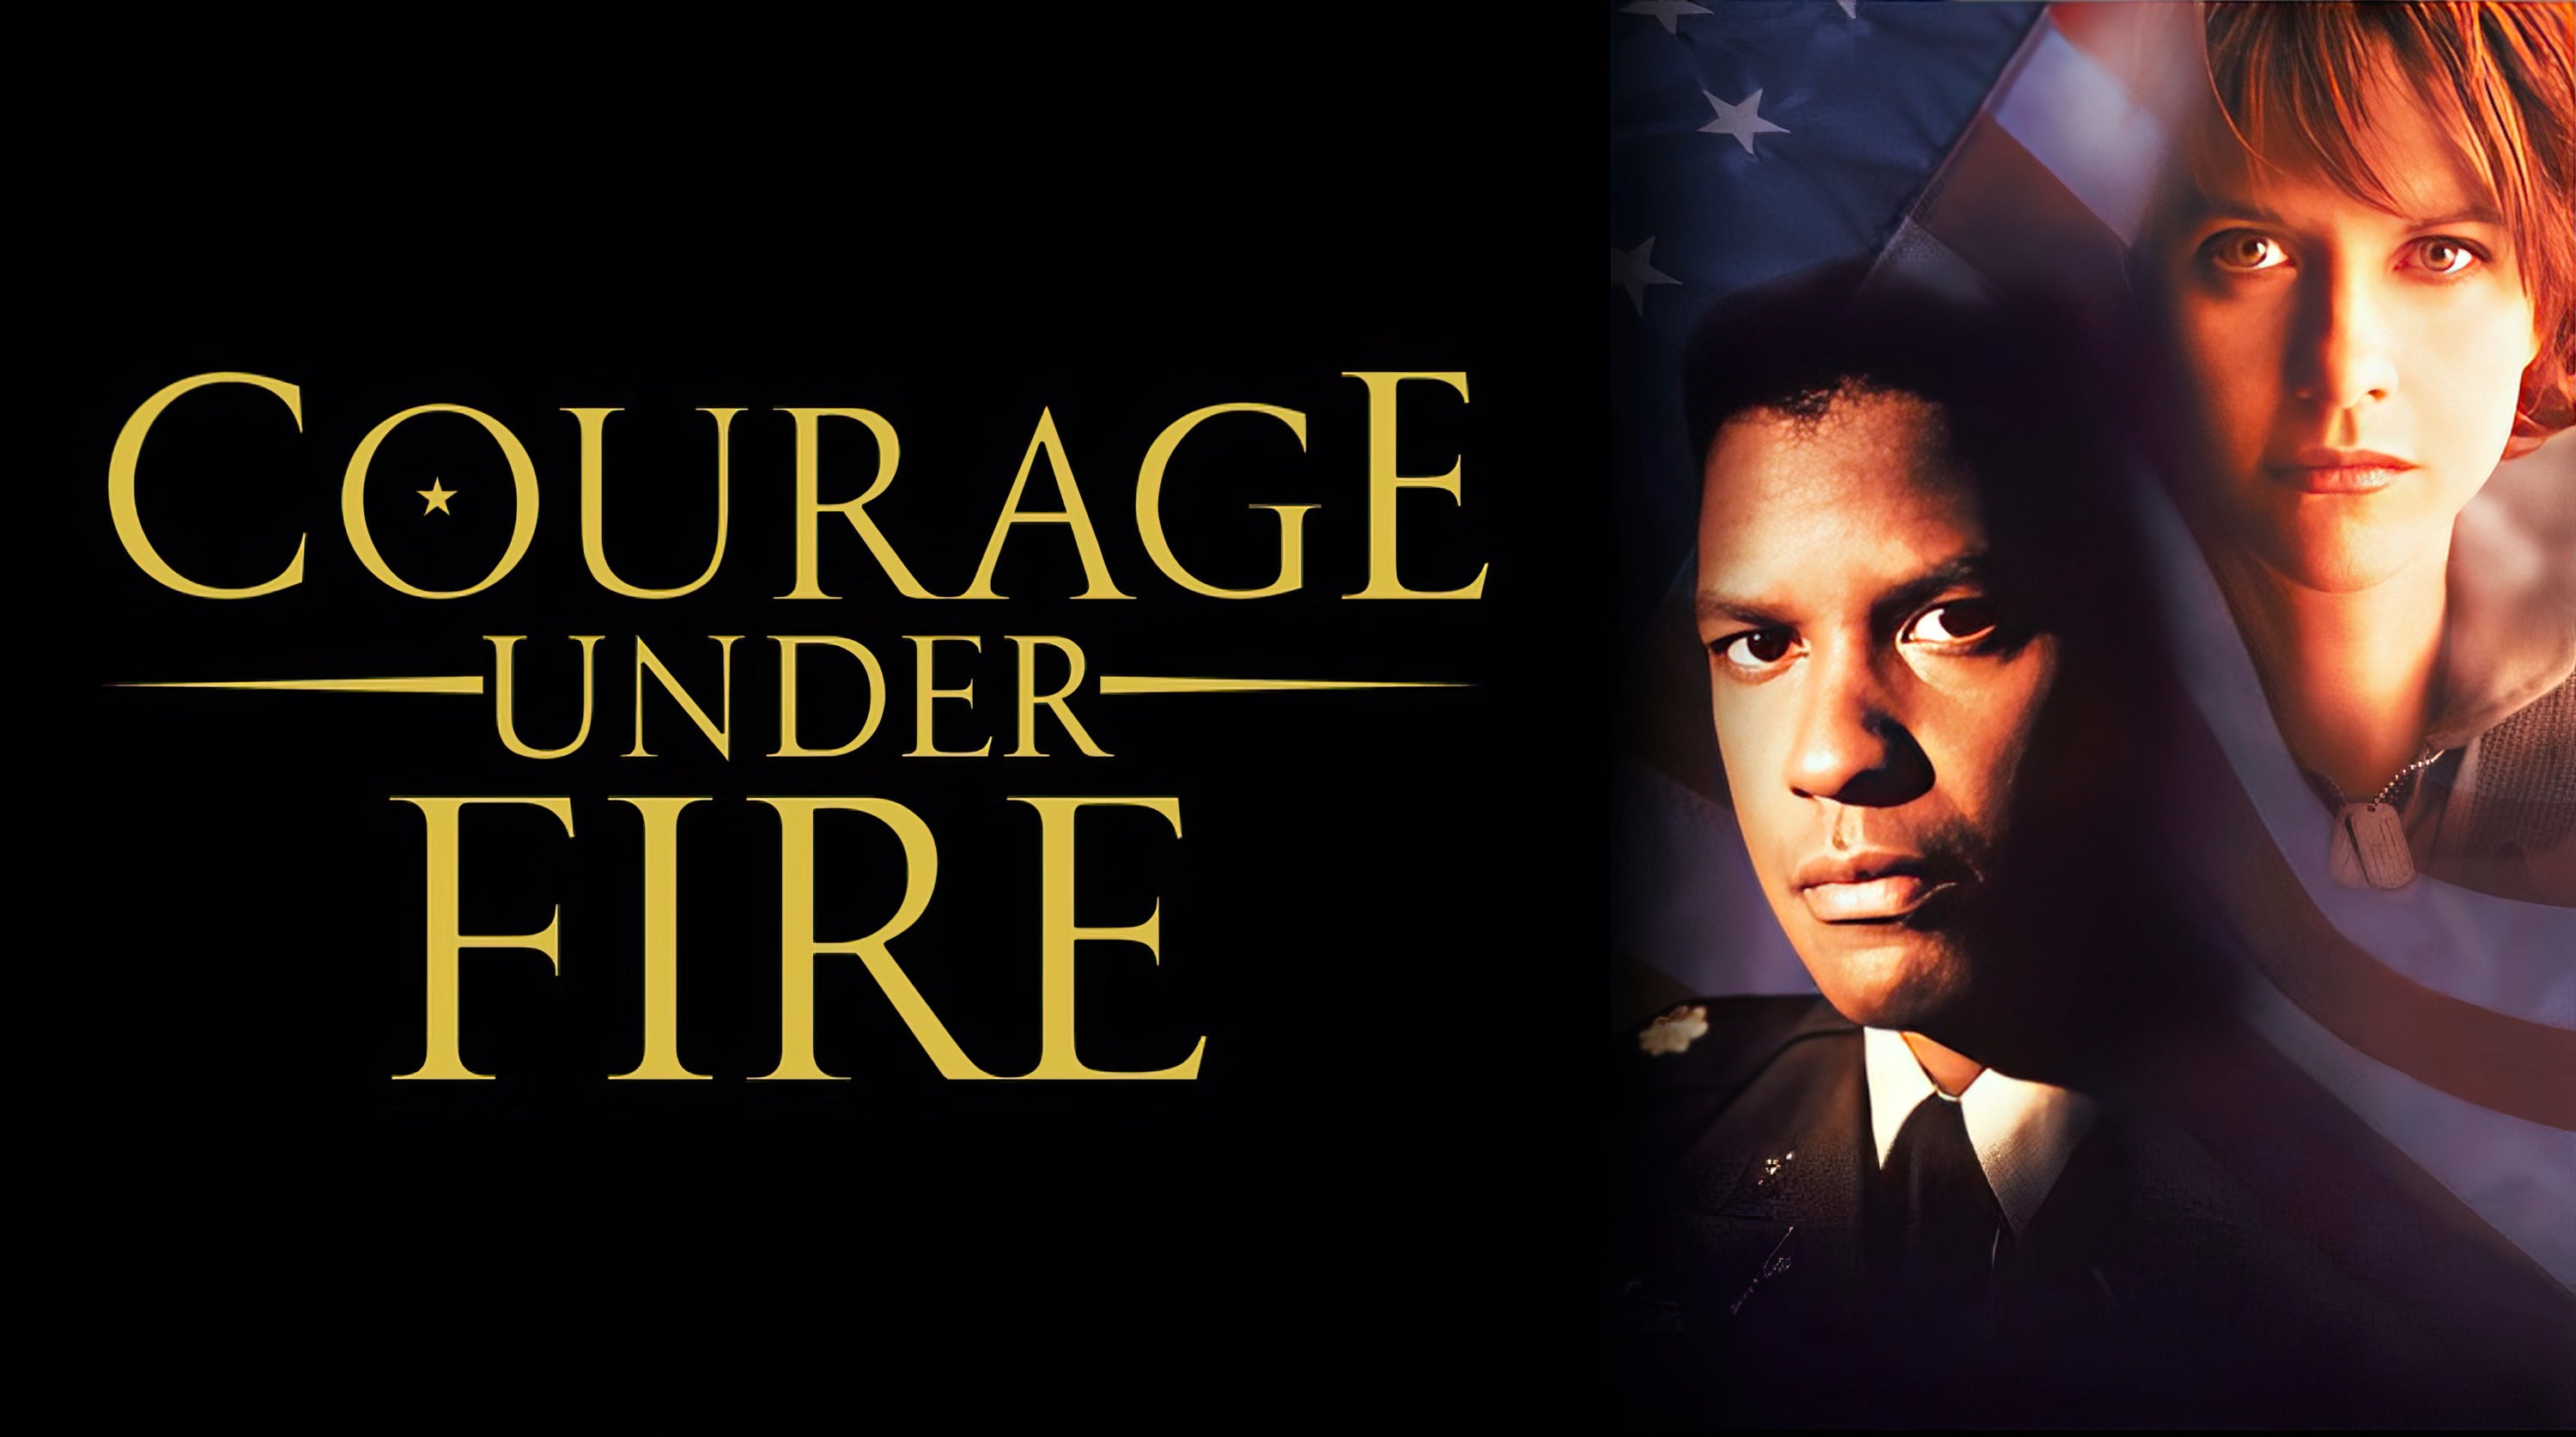 Courage Under Fire Script Screenplay - Image of Movie Poster